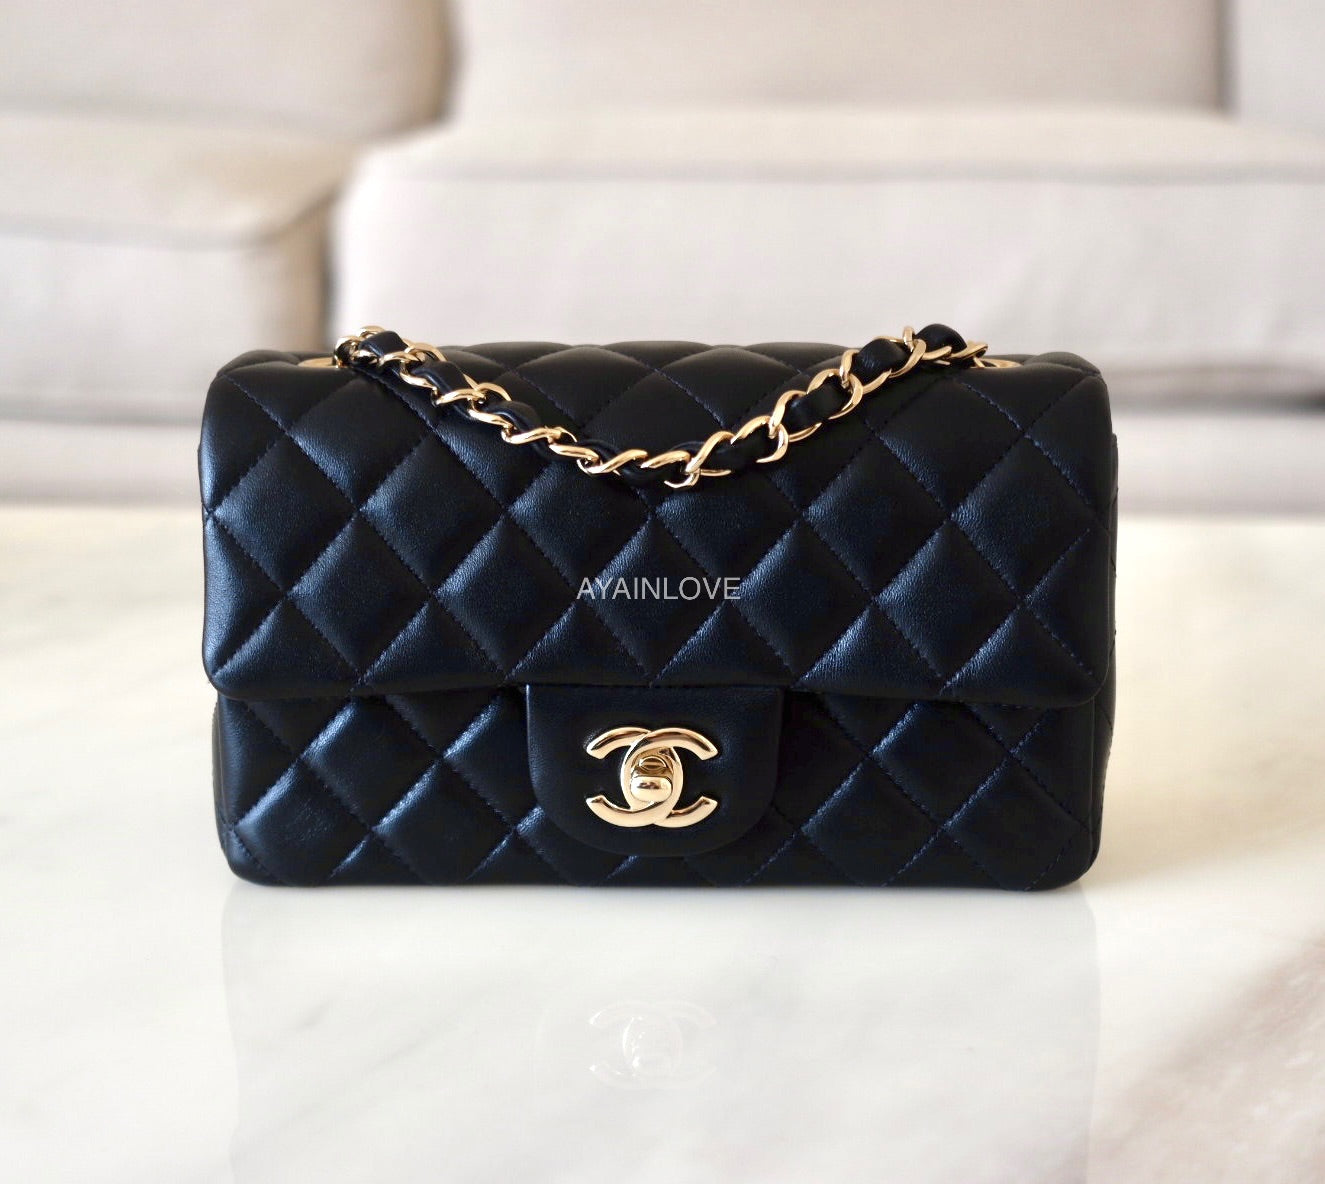 Chanel - authentic luxury pieces curated by Loveholic – loveholic